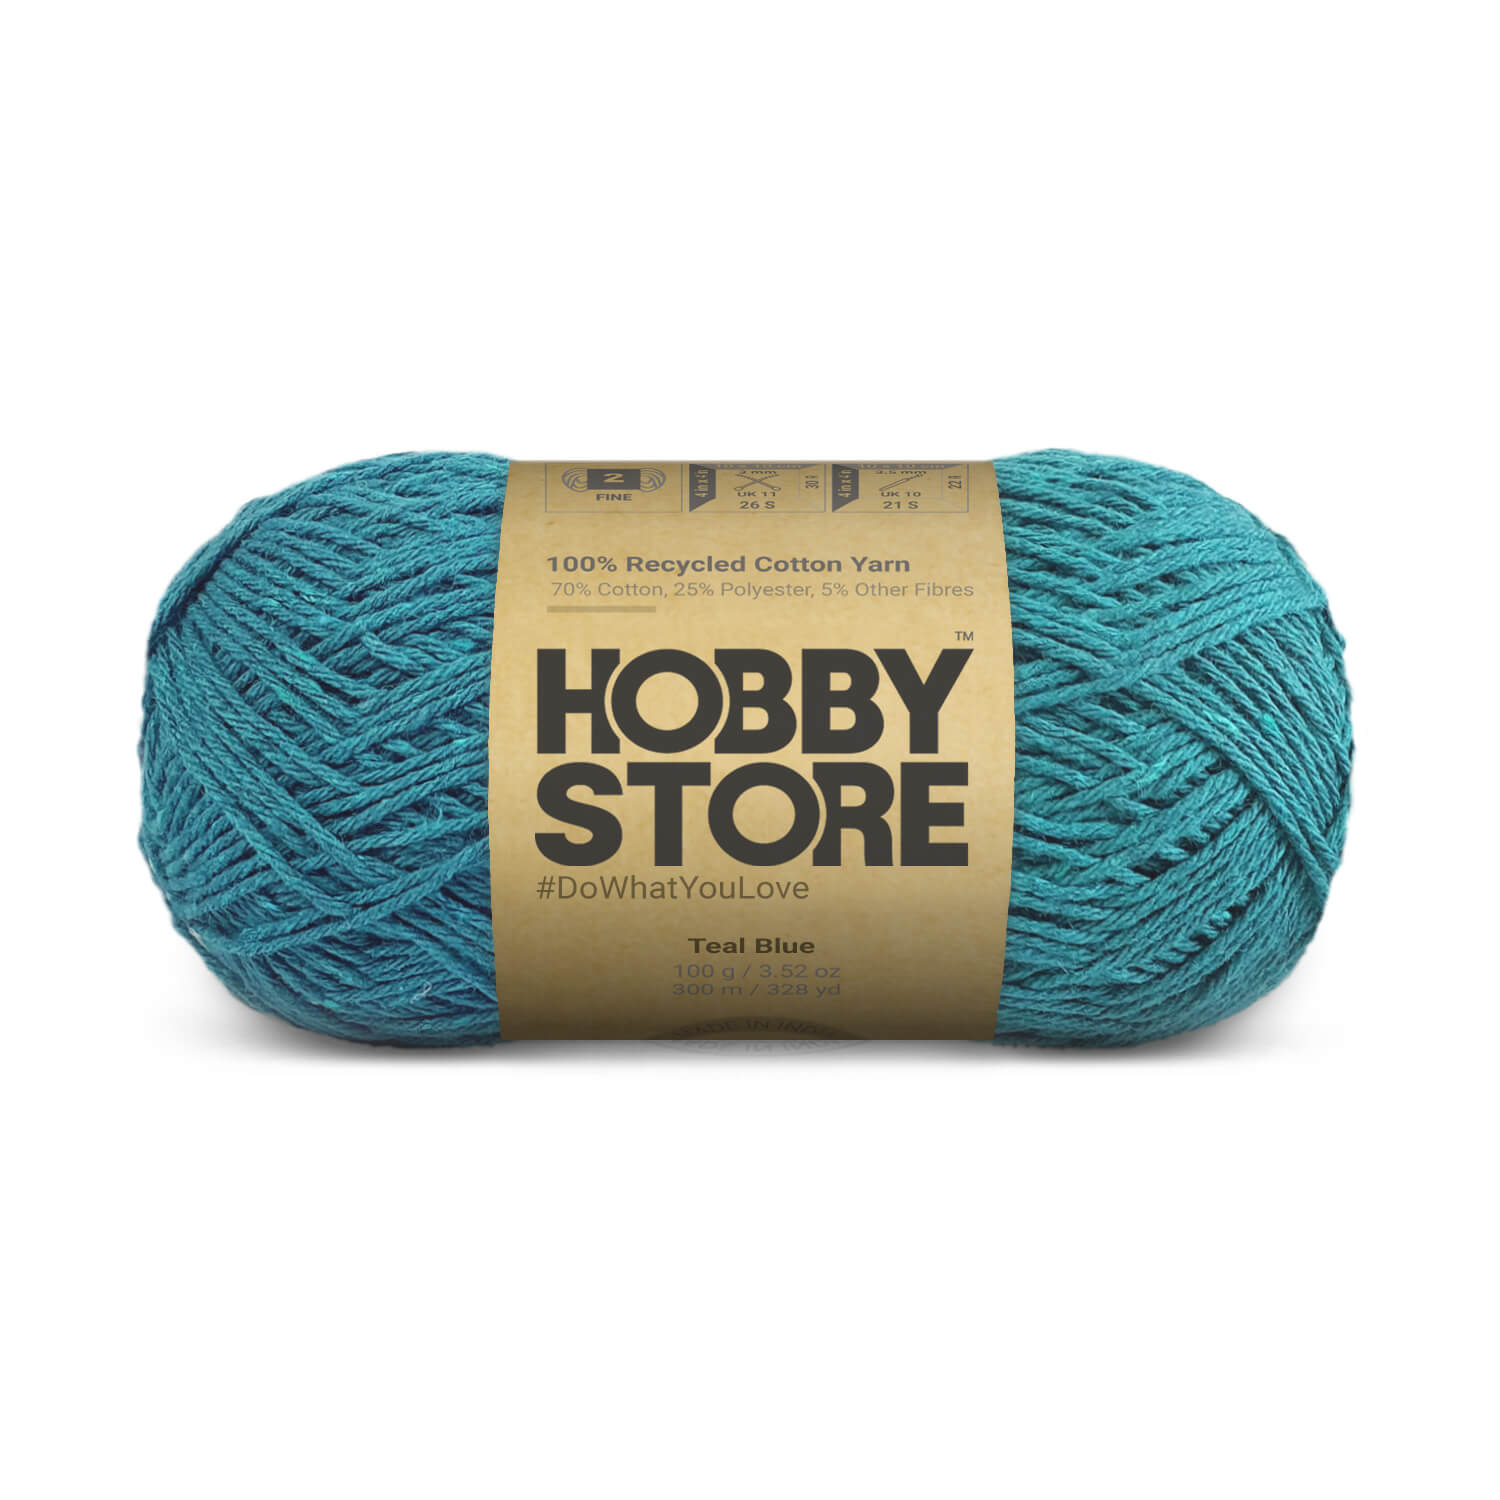 Recycled Cotton Yarn by Hobby Store - Teal Blue 8433